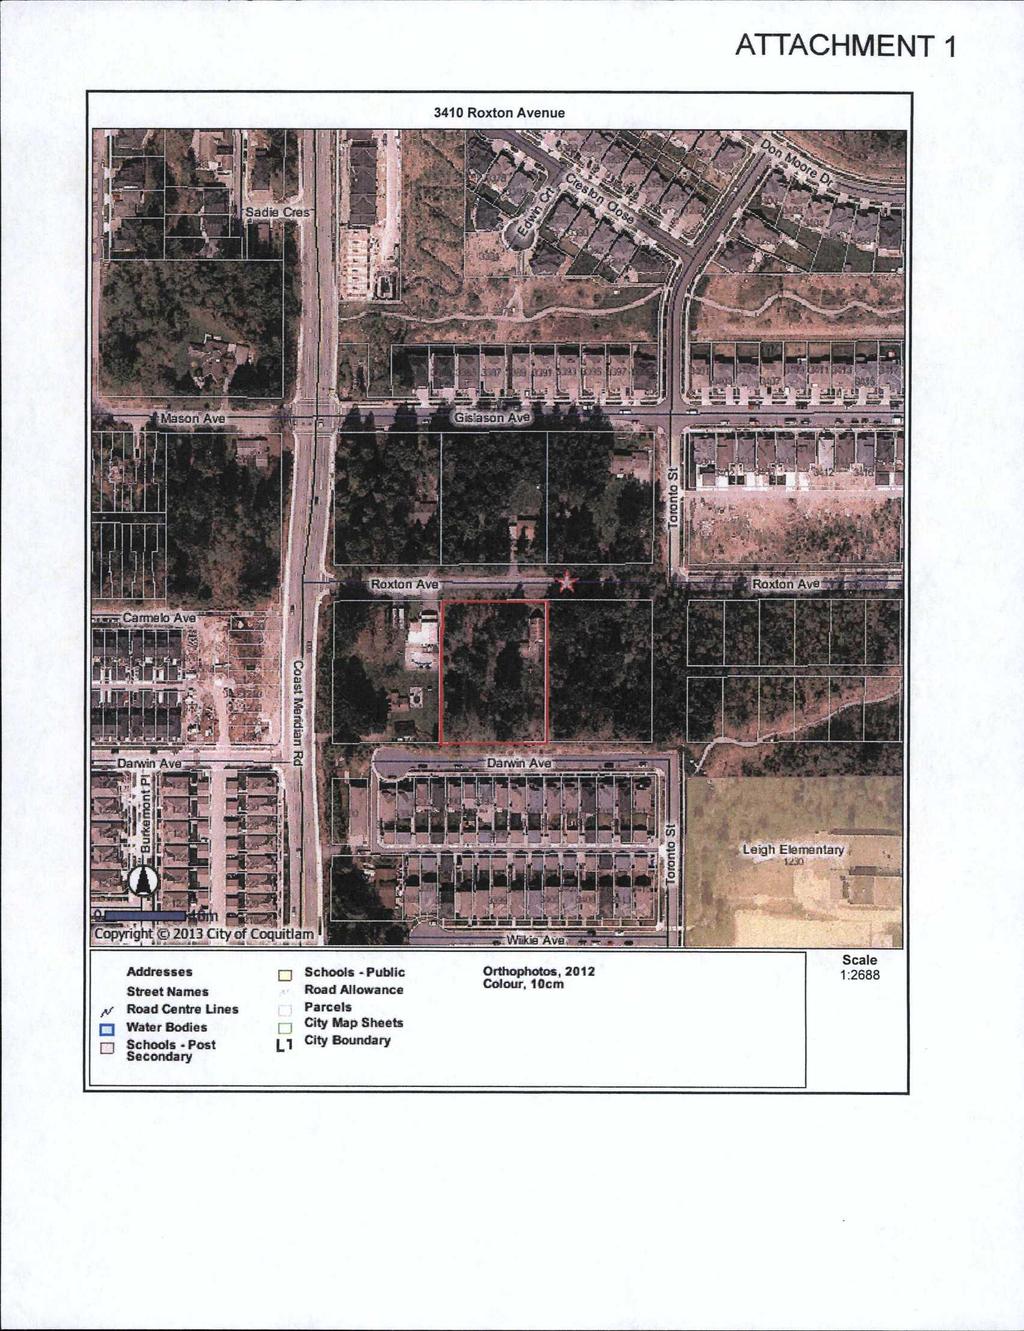 ATTACHMENT 1 3410 Roxton Avenue Copyright 2013 City of Coquitlam n ni Ackfresses Street Names Road Centre Lines Water Bodies Schools -